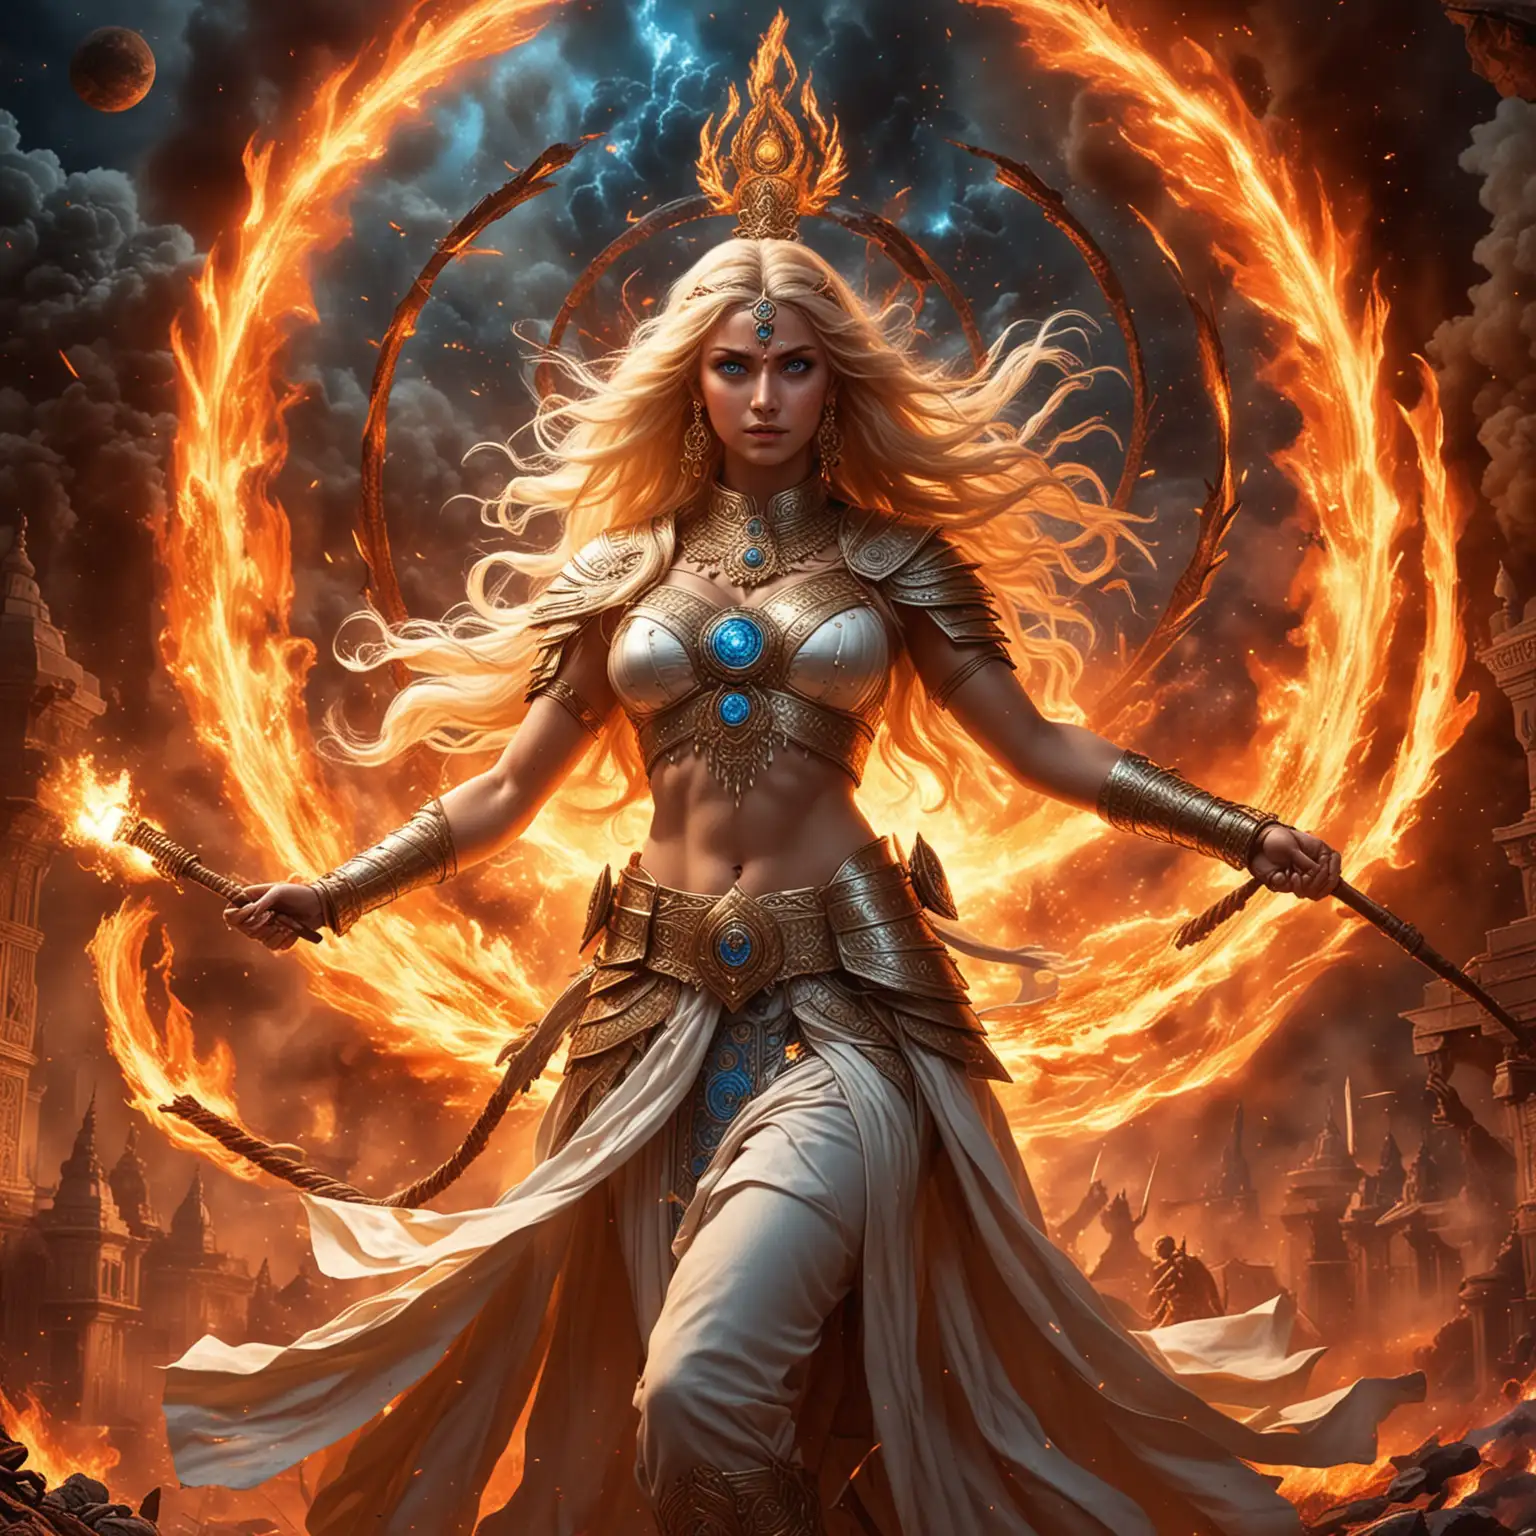 Blonde Hindu Goddess Empress in Battle with Fire Whip and Planetary Destruction